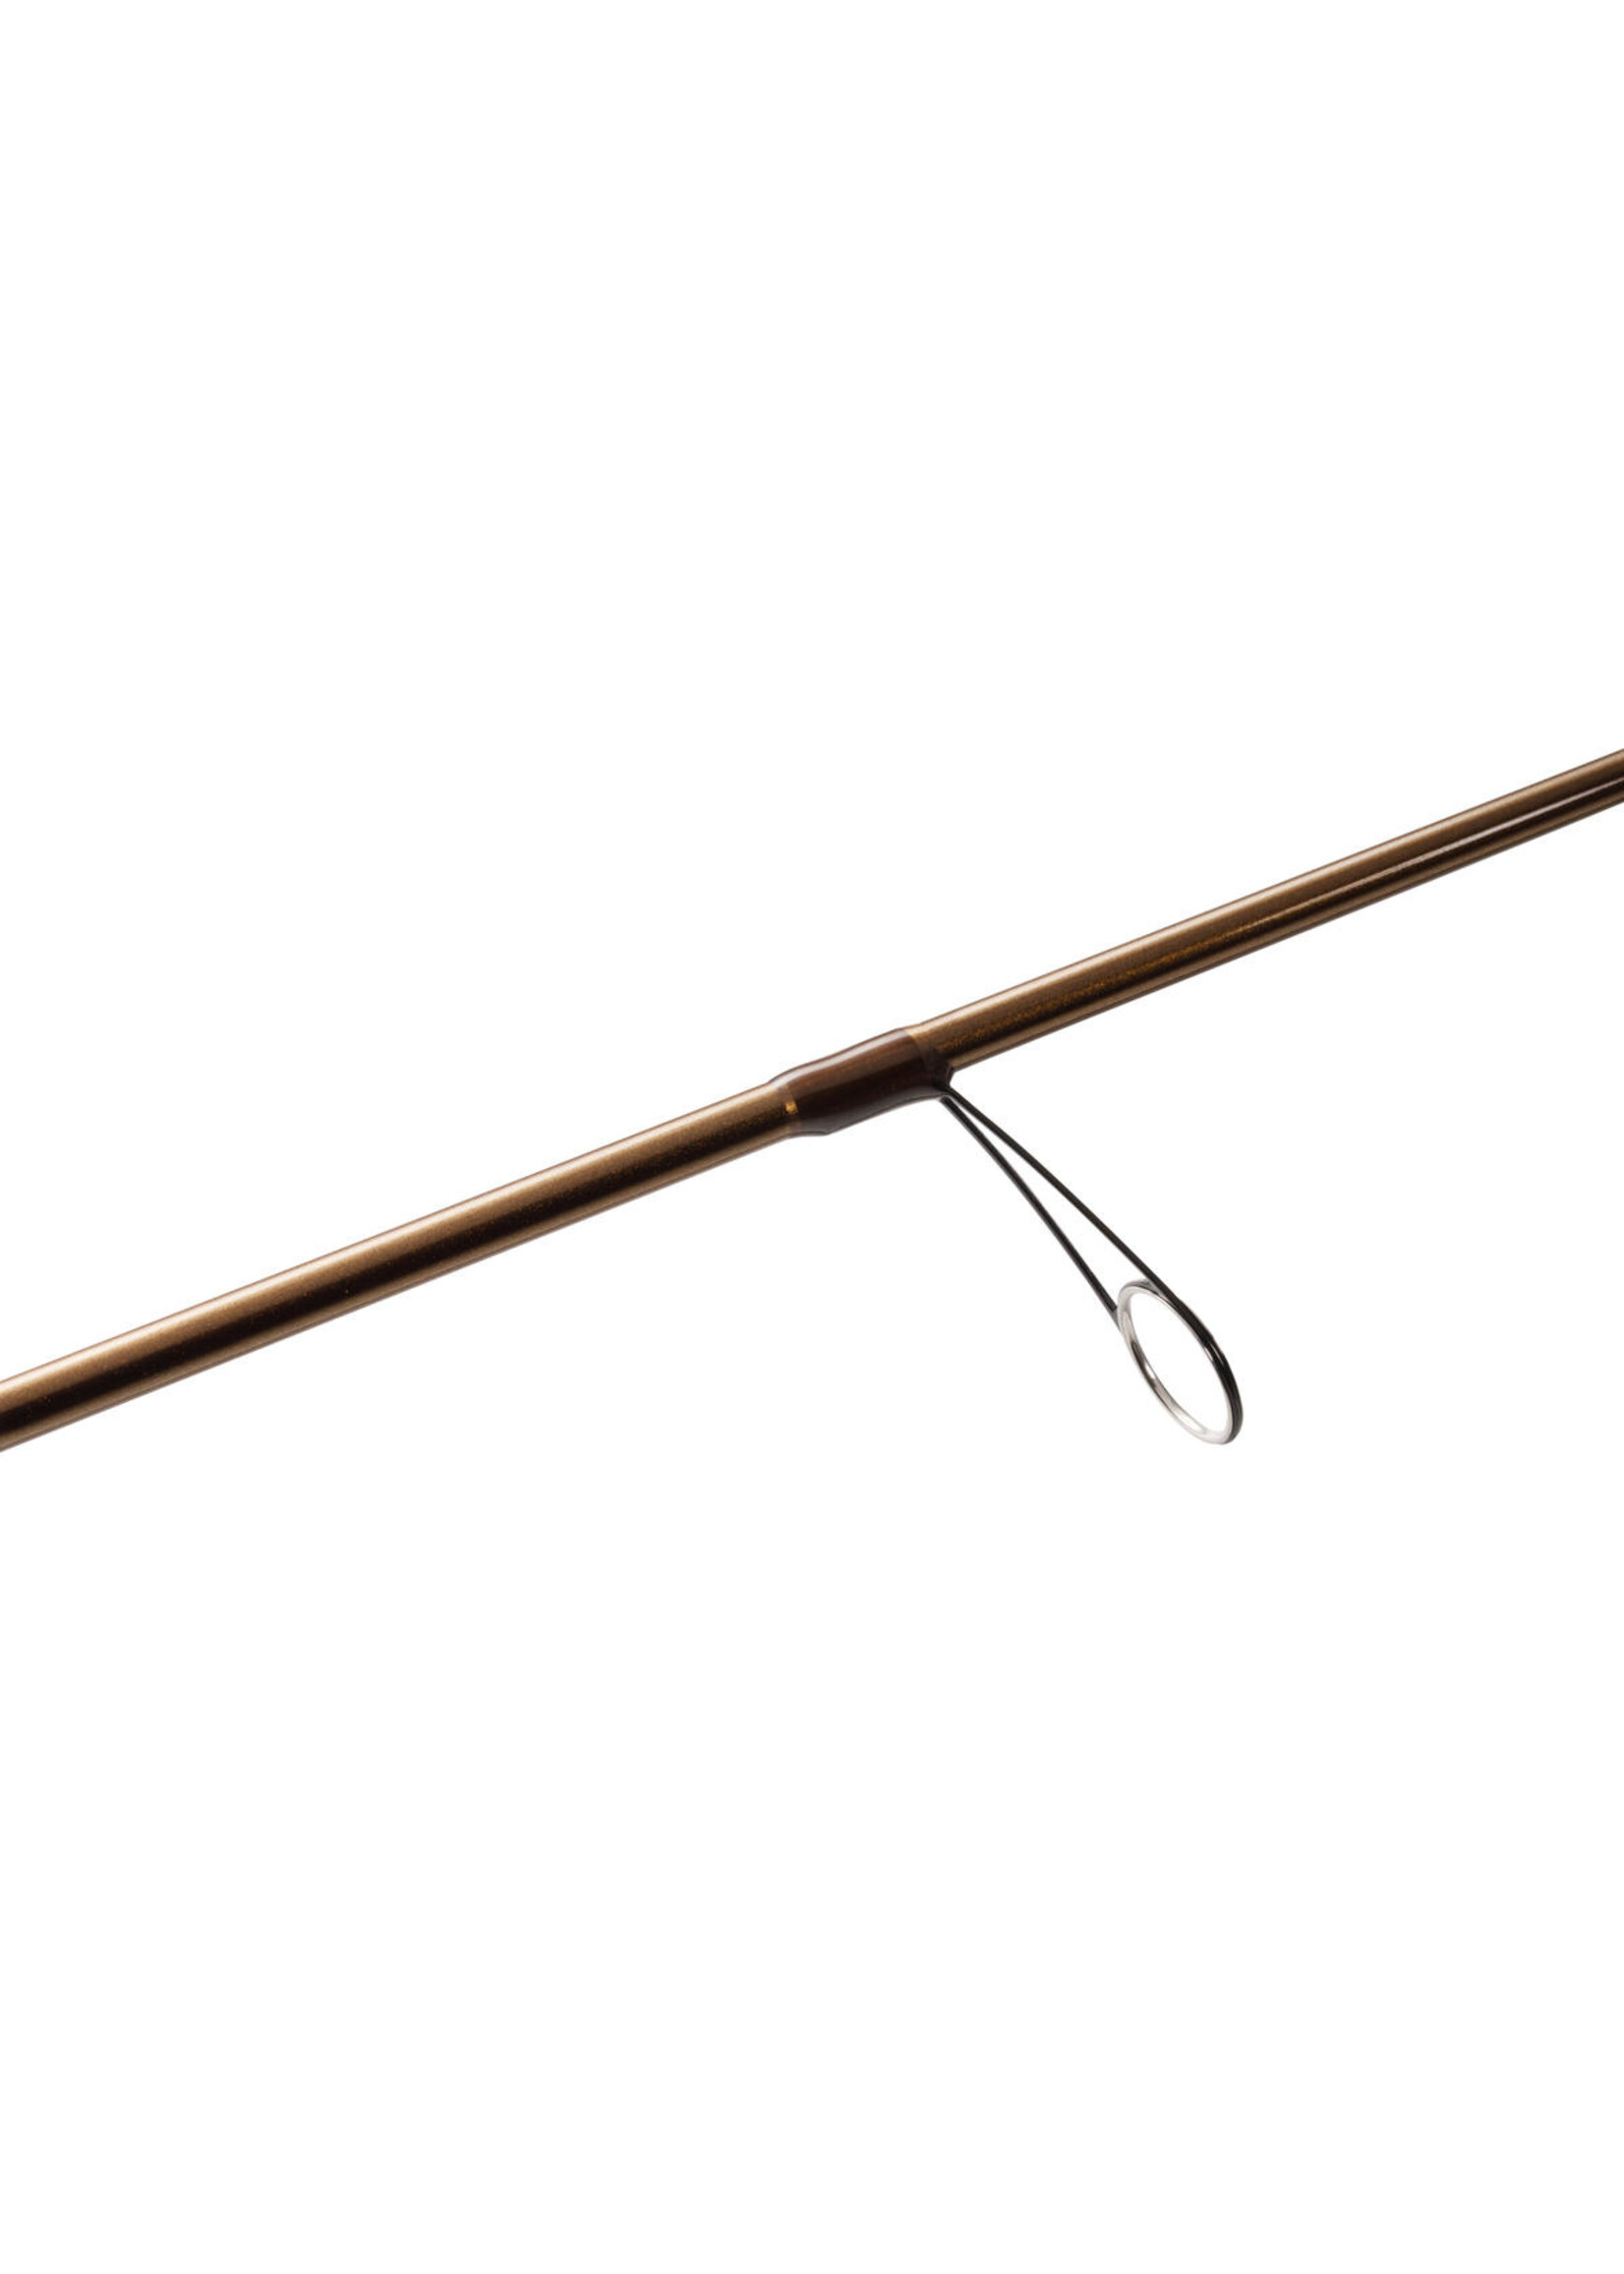 7' L Ex Fast Panfish Series Spin Rod